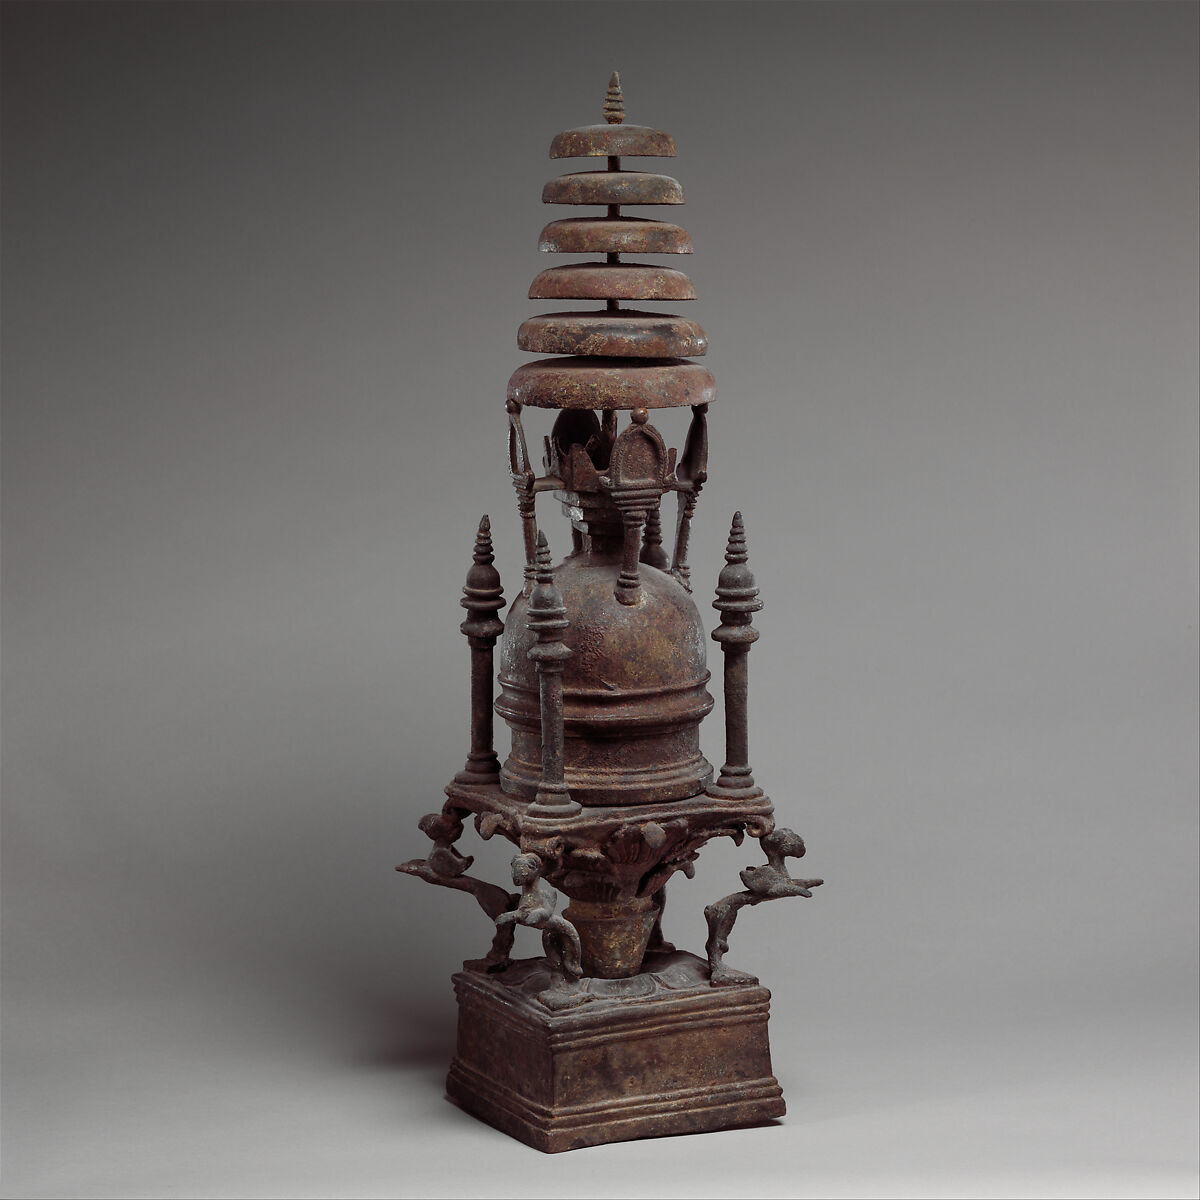 Reliquary in the Shape of a Stupa, Bronze, Pakistan (ancient region of Gandhara) 